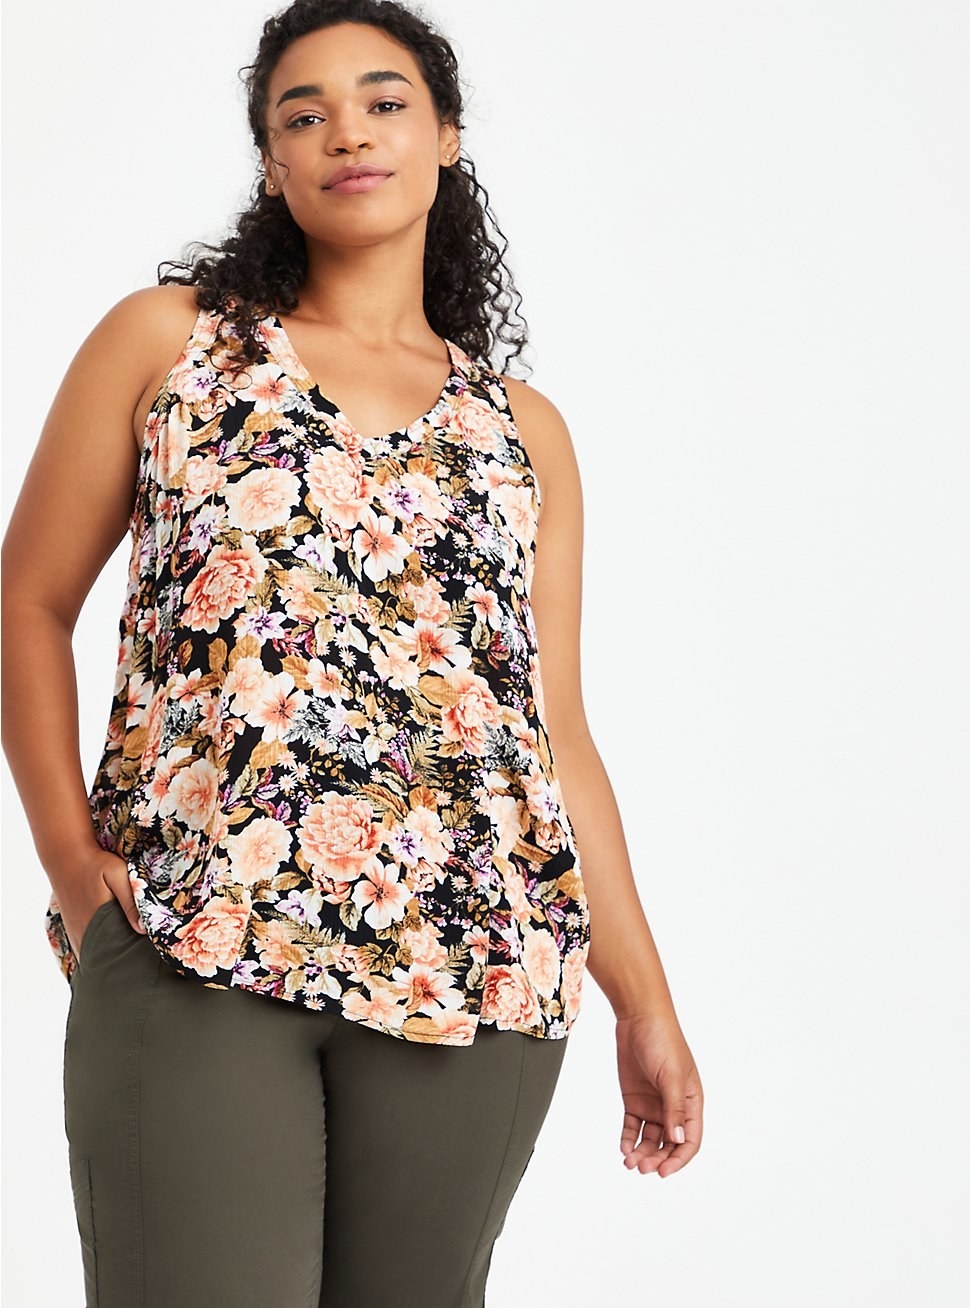 A model in the floral tank